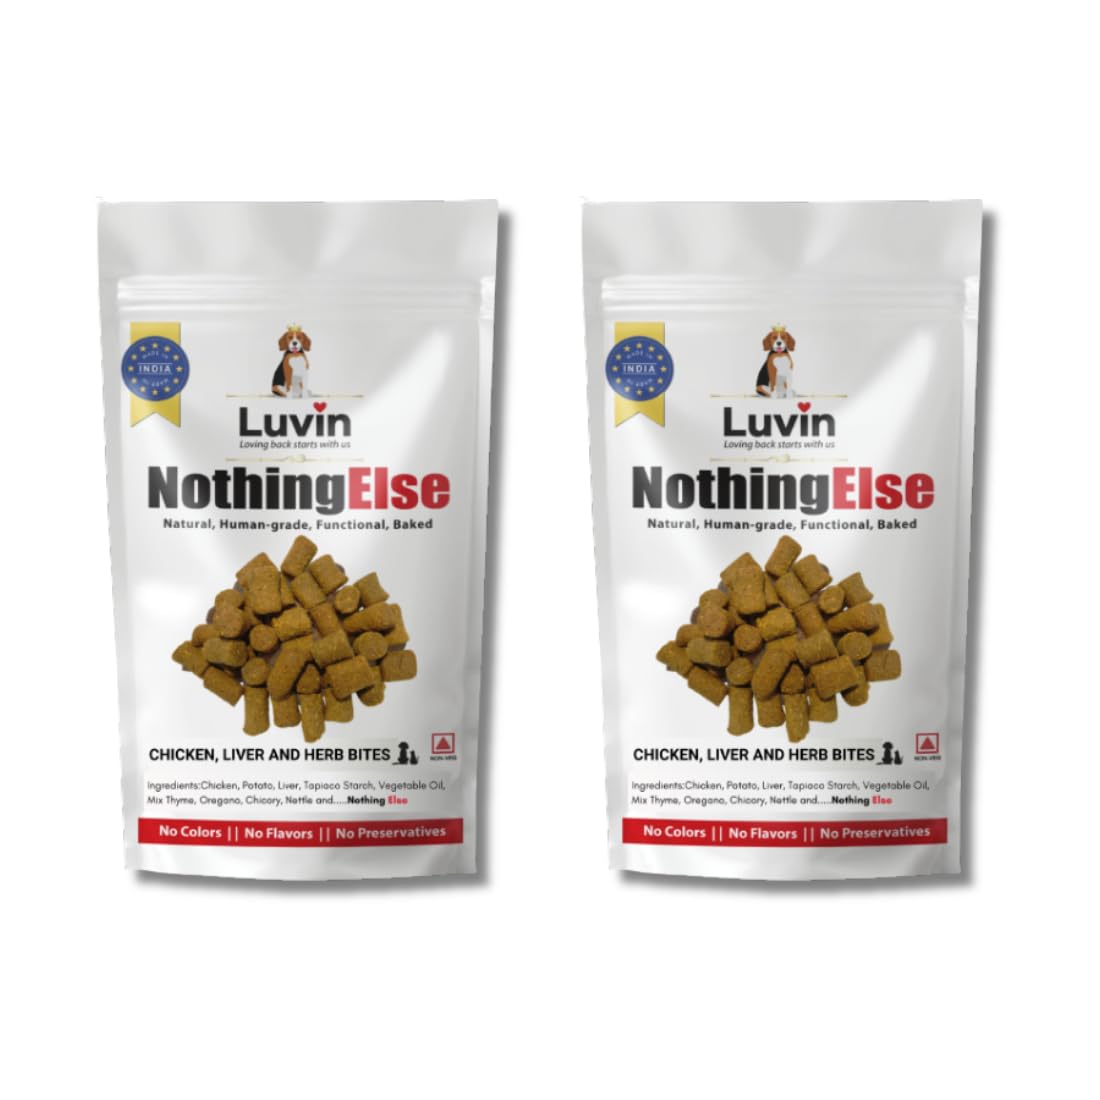 Luvin Nothing Else Chicken, Liver and Herb Bites 150g (Pack of 2) Human-Grade Treats for Dogs and Cats | No Colors | No Flavors | No Preservatives 